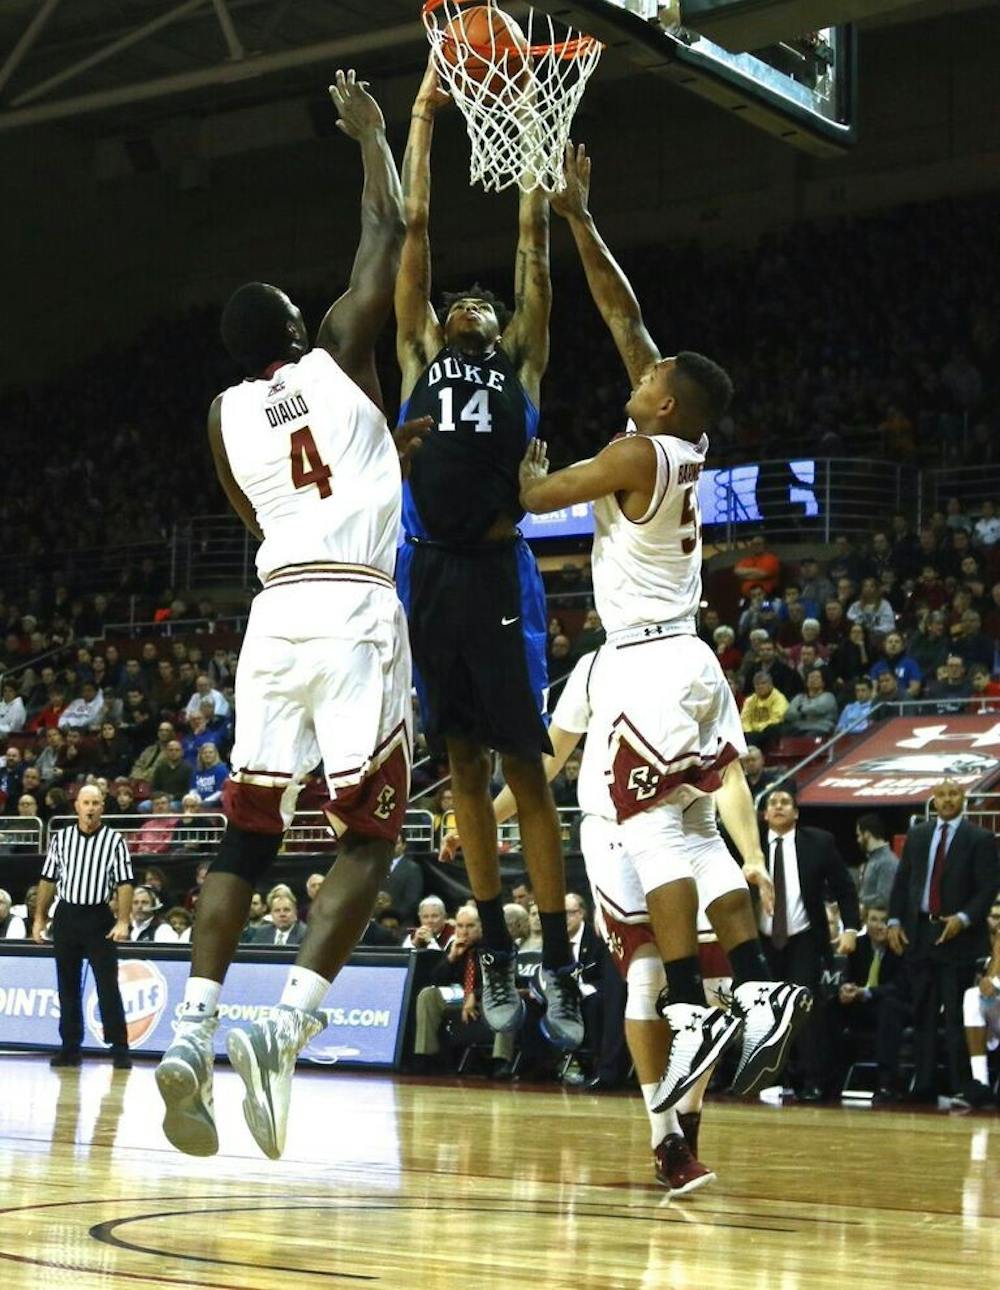 <p>Brandon Ingram delivered a highlight-reel slam dunk in the first half as the Blue Devils created some breathing room against Boston College.</p>